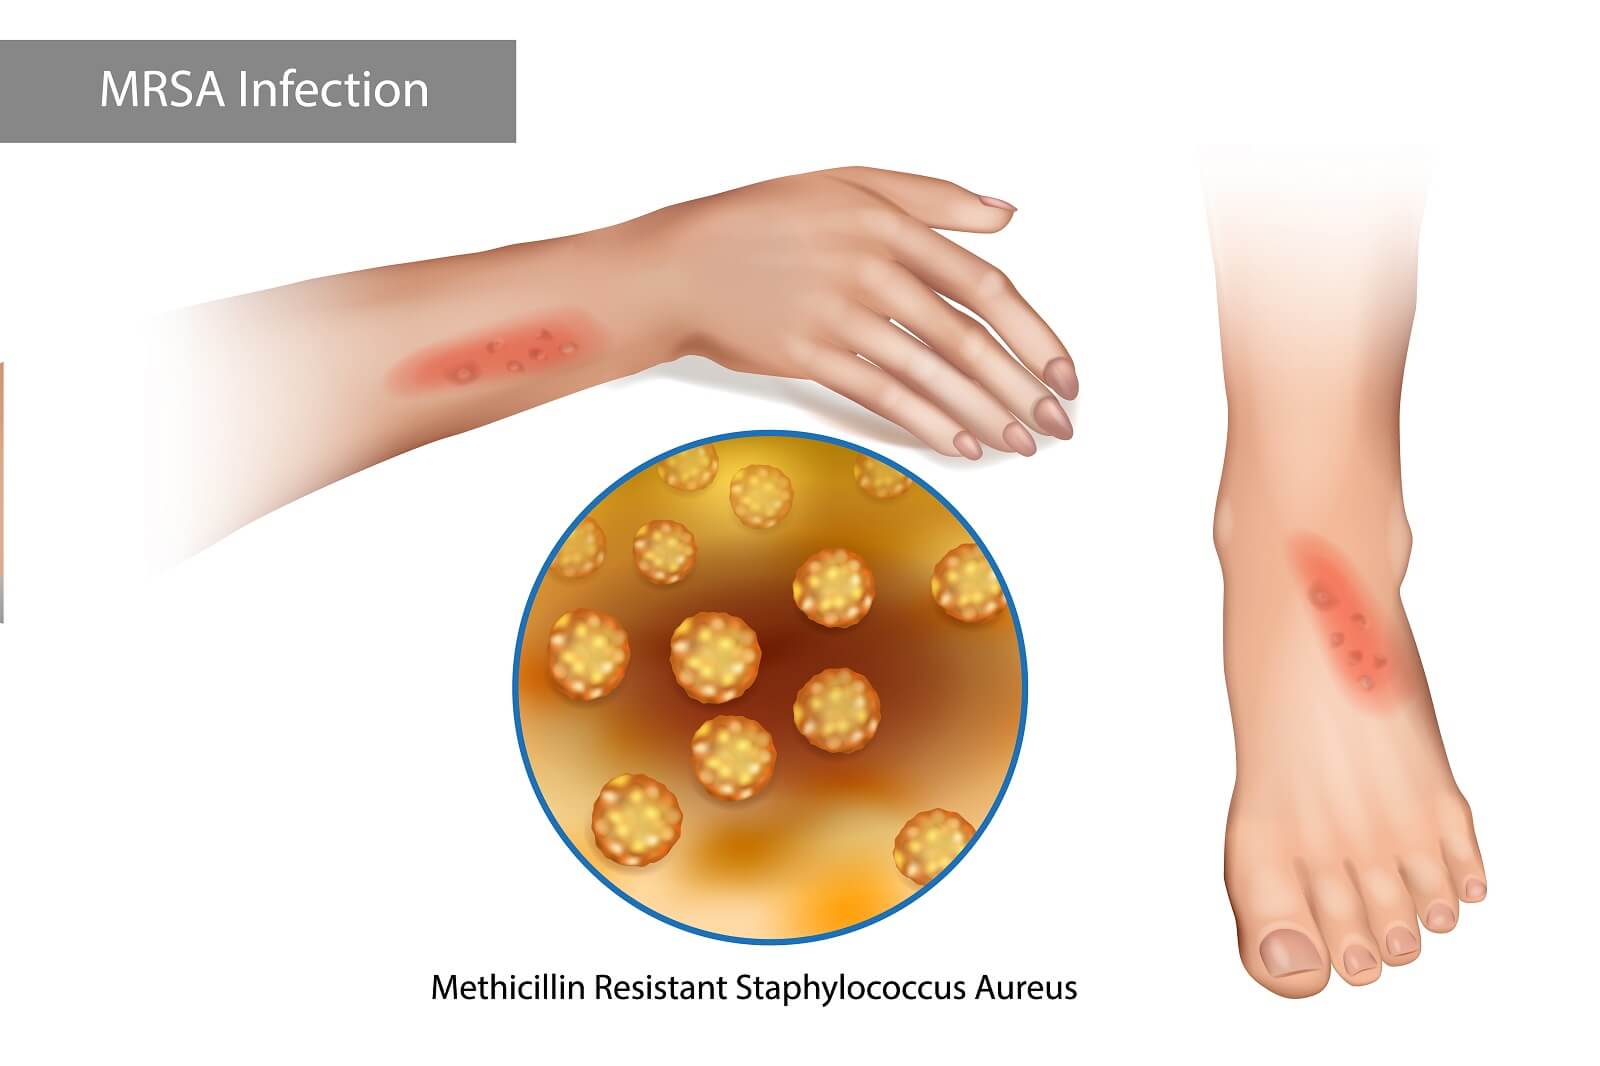 MRSA Infection. Methicillin Resistant Staphylococcus Aureus. Rashes on the arms and legs caused by staphylococcus — Vector